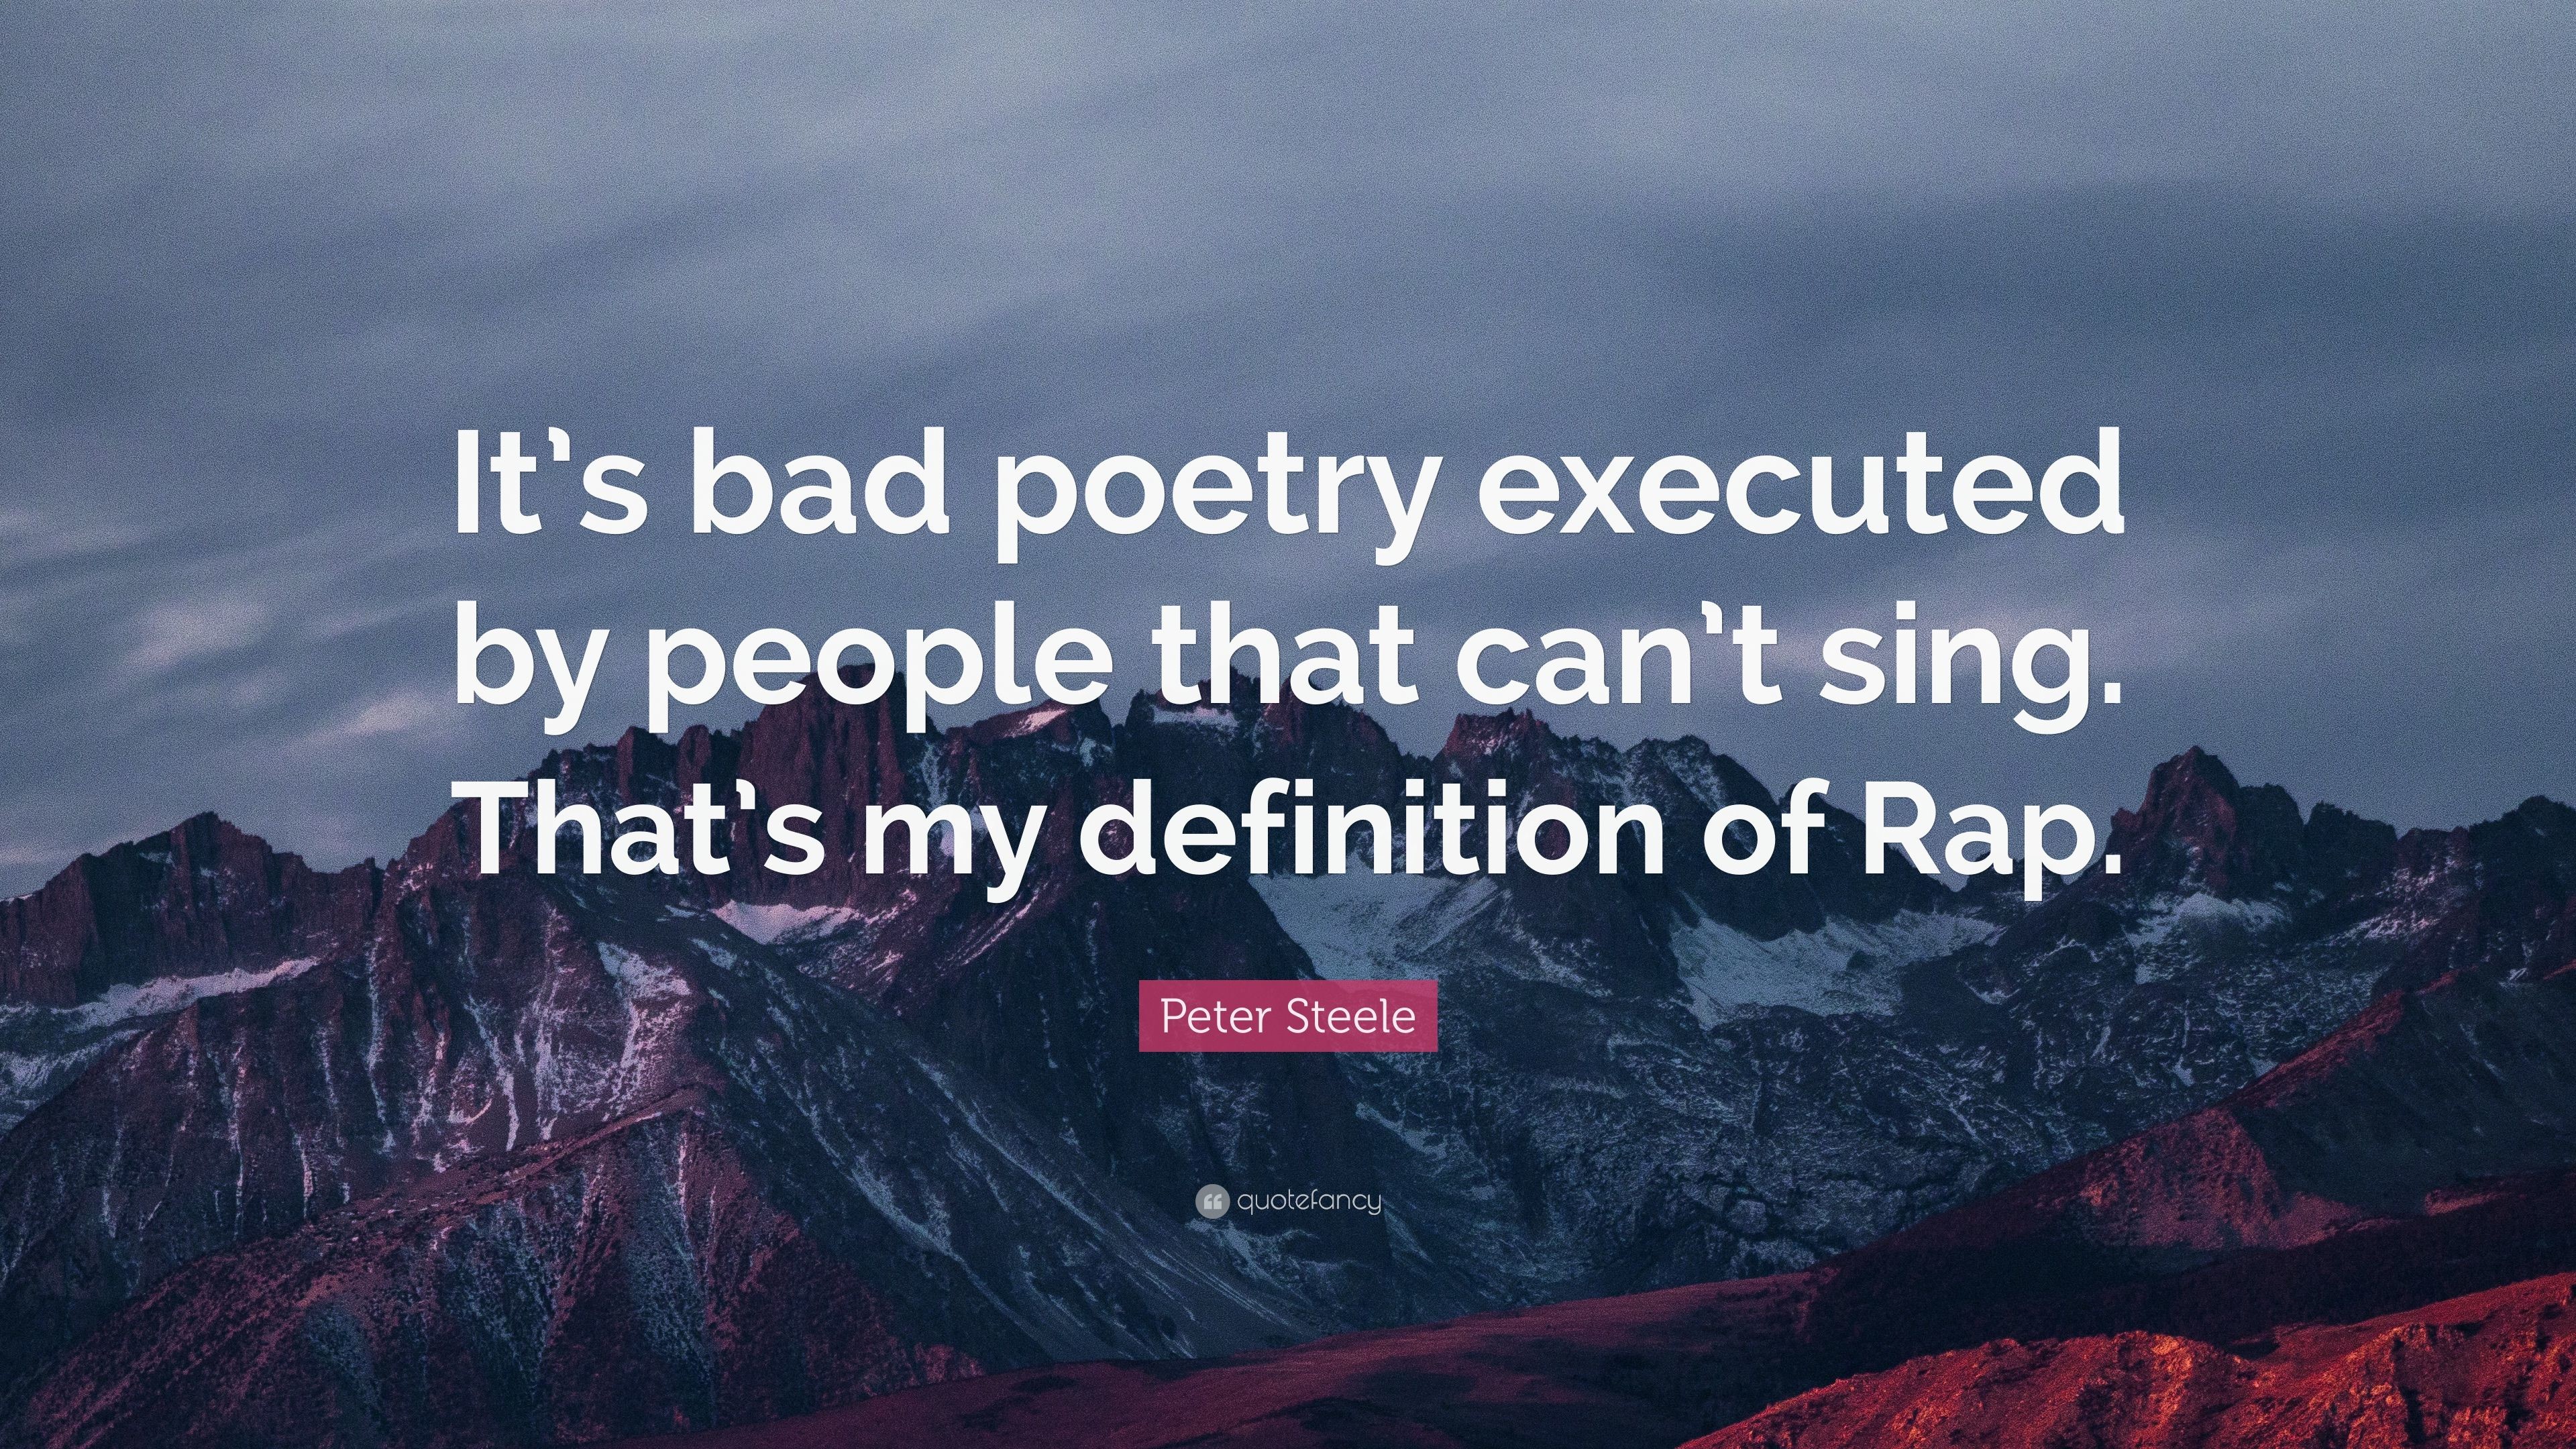 3840x2160 Peter Steele Quote: “It's bad poetry executed by people that can't sing